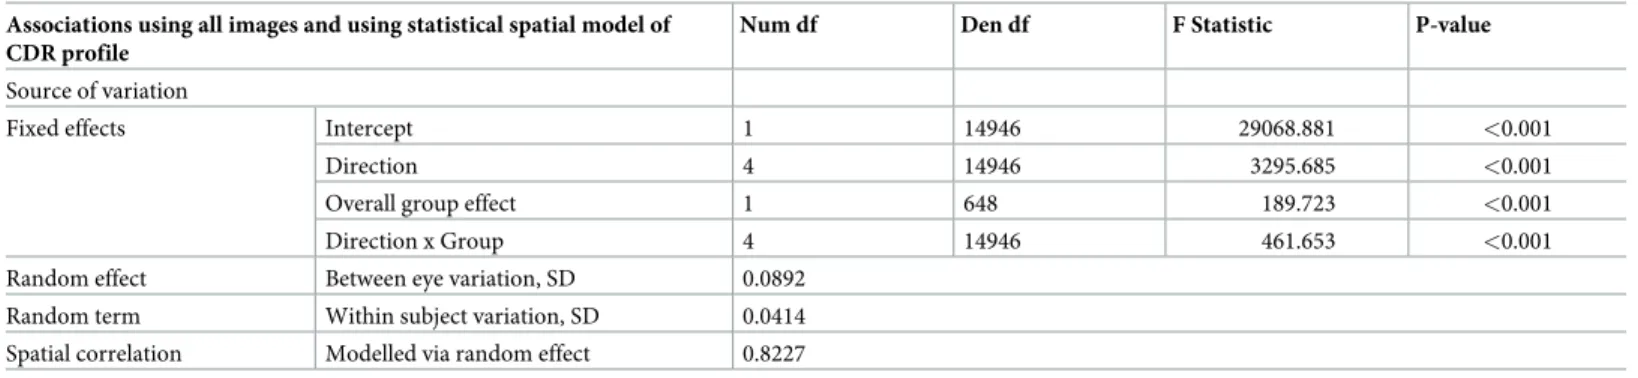 Table 1. Fitted spatial statistical model and association with disease group in the ORIGA dataset.